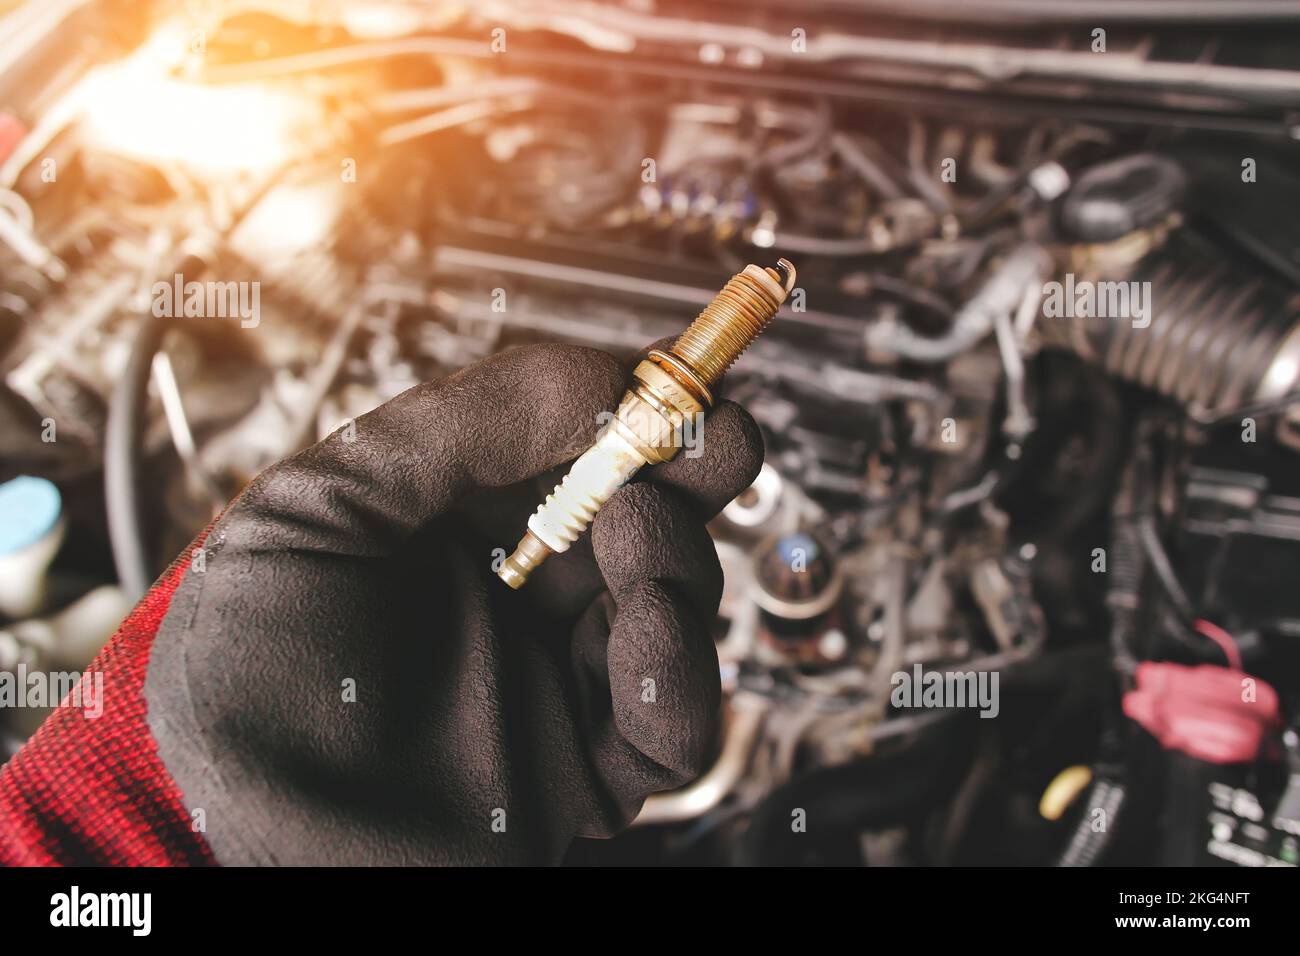 Automobile iridium spark plugs holds by auto mechanic hand with engine compartment blurred background and sunlight. Stock Photo